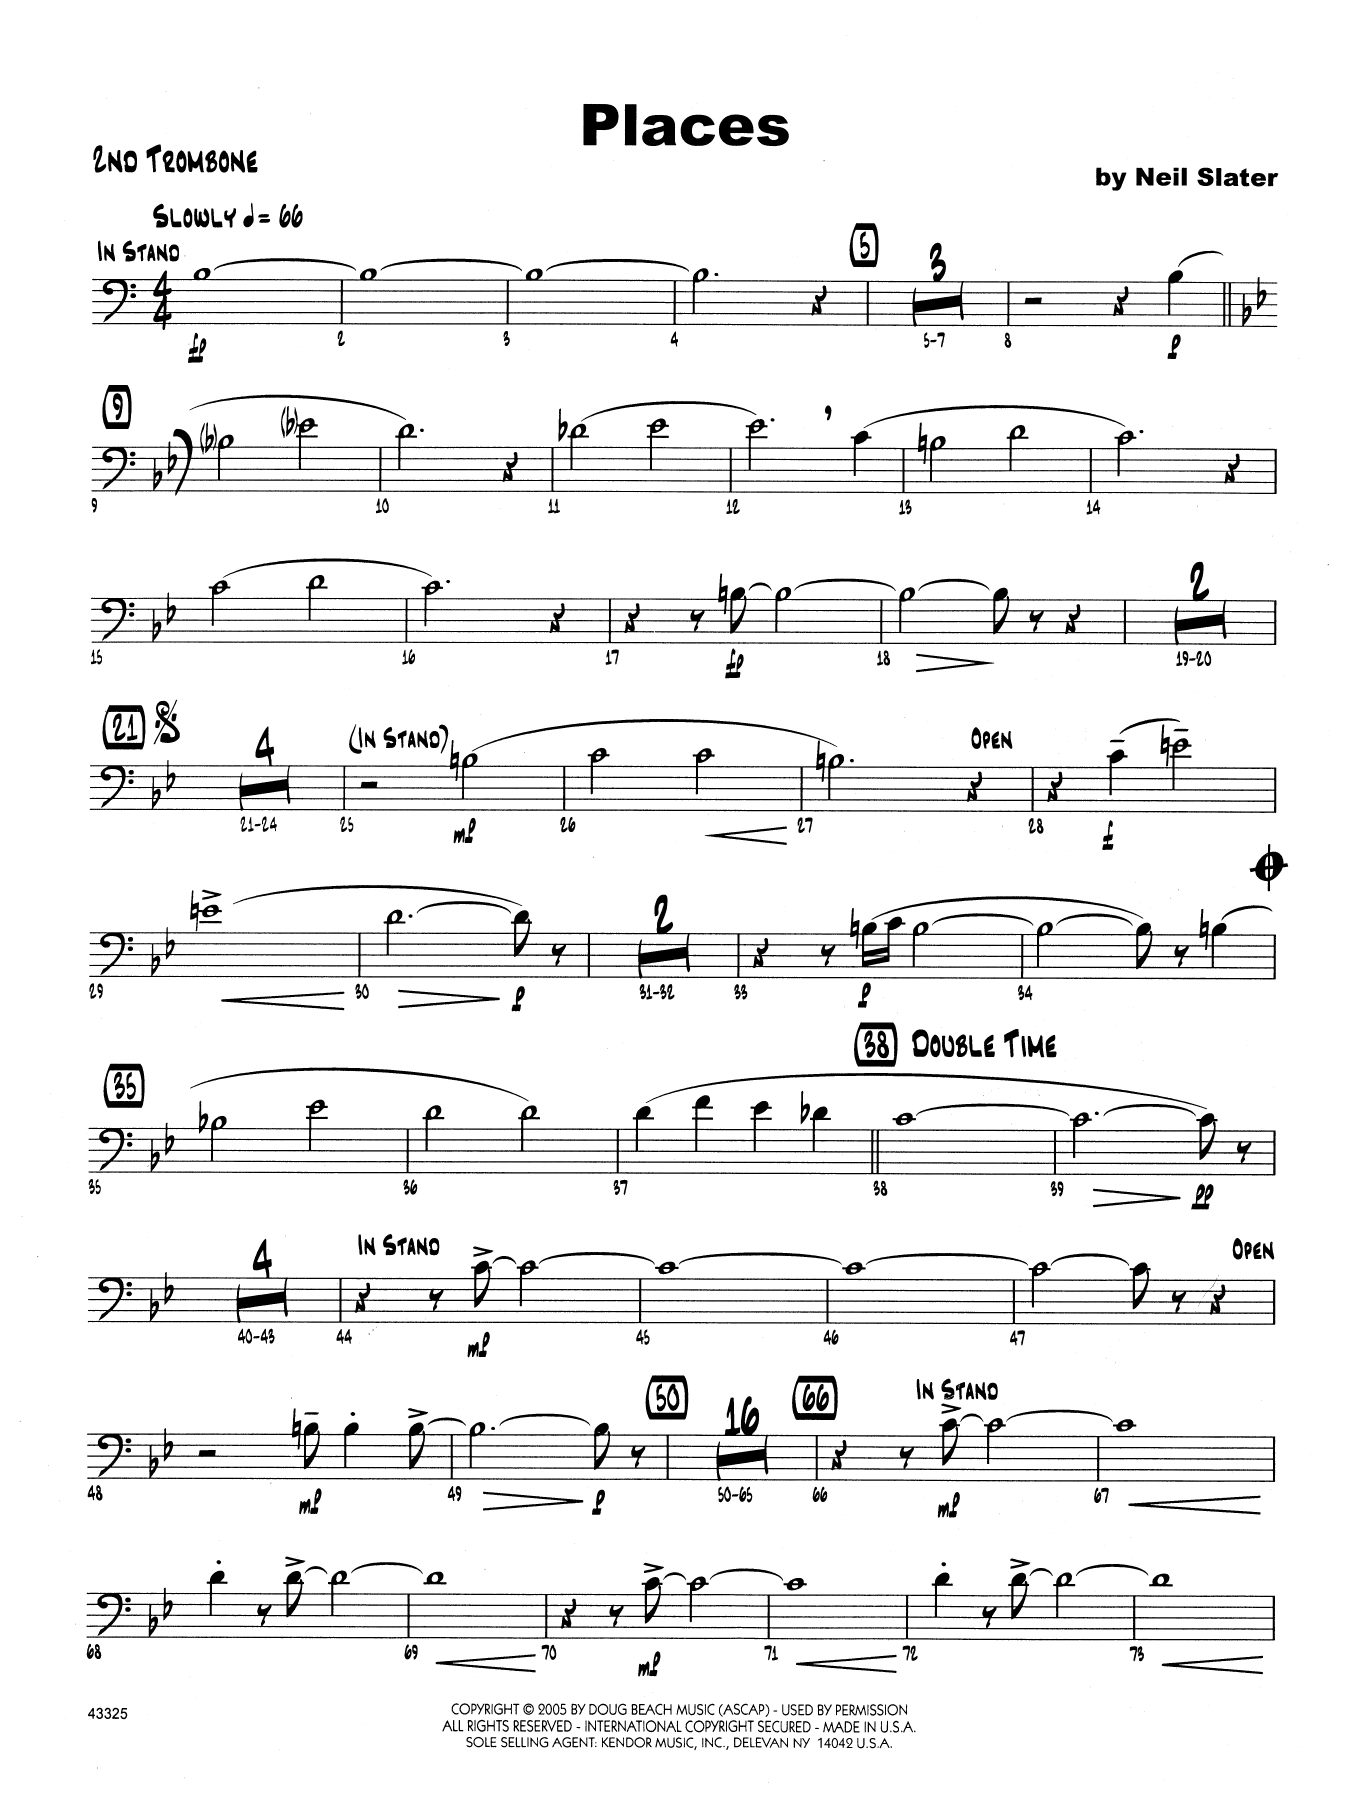 Download Neil Slater Places - 2nd Trombone Sheet Music